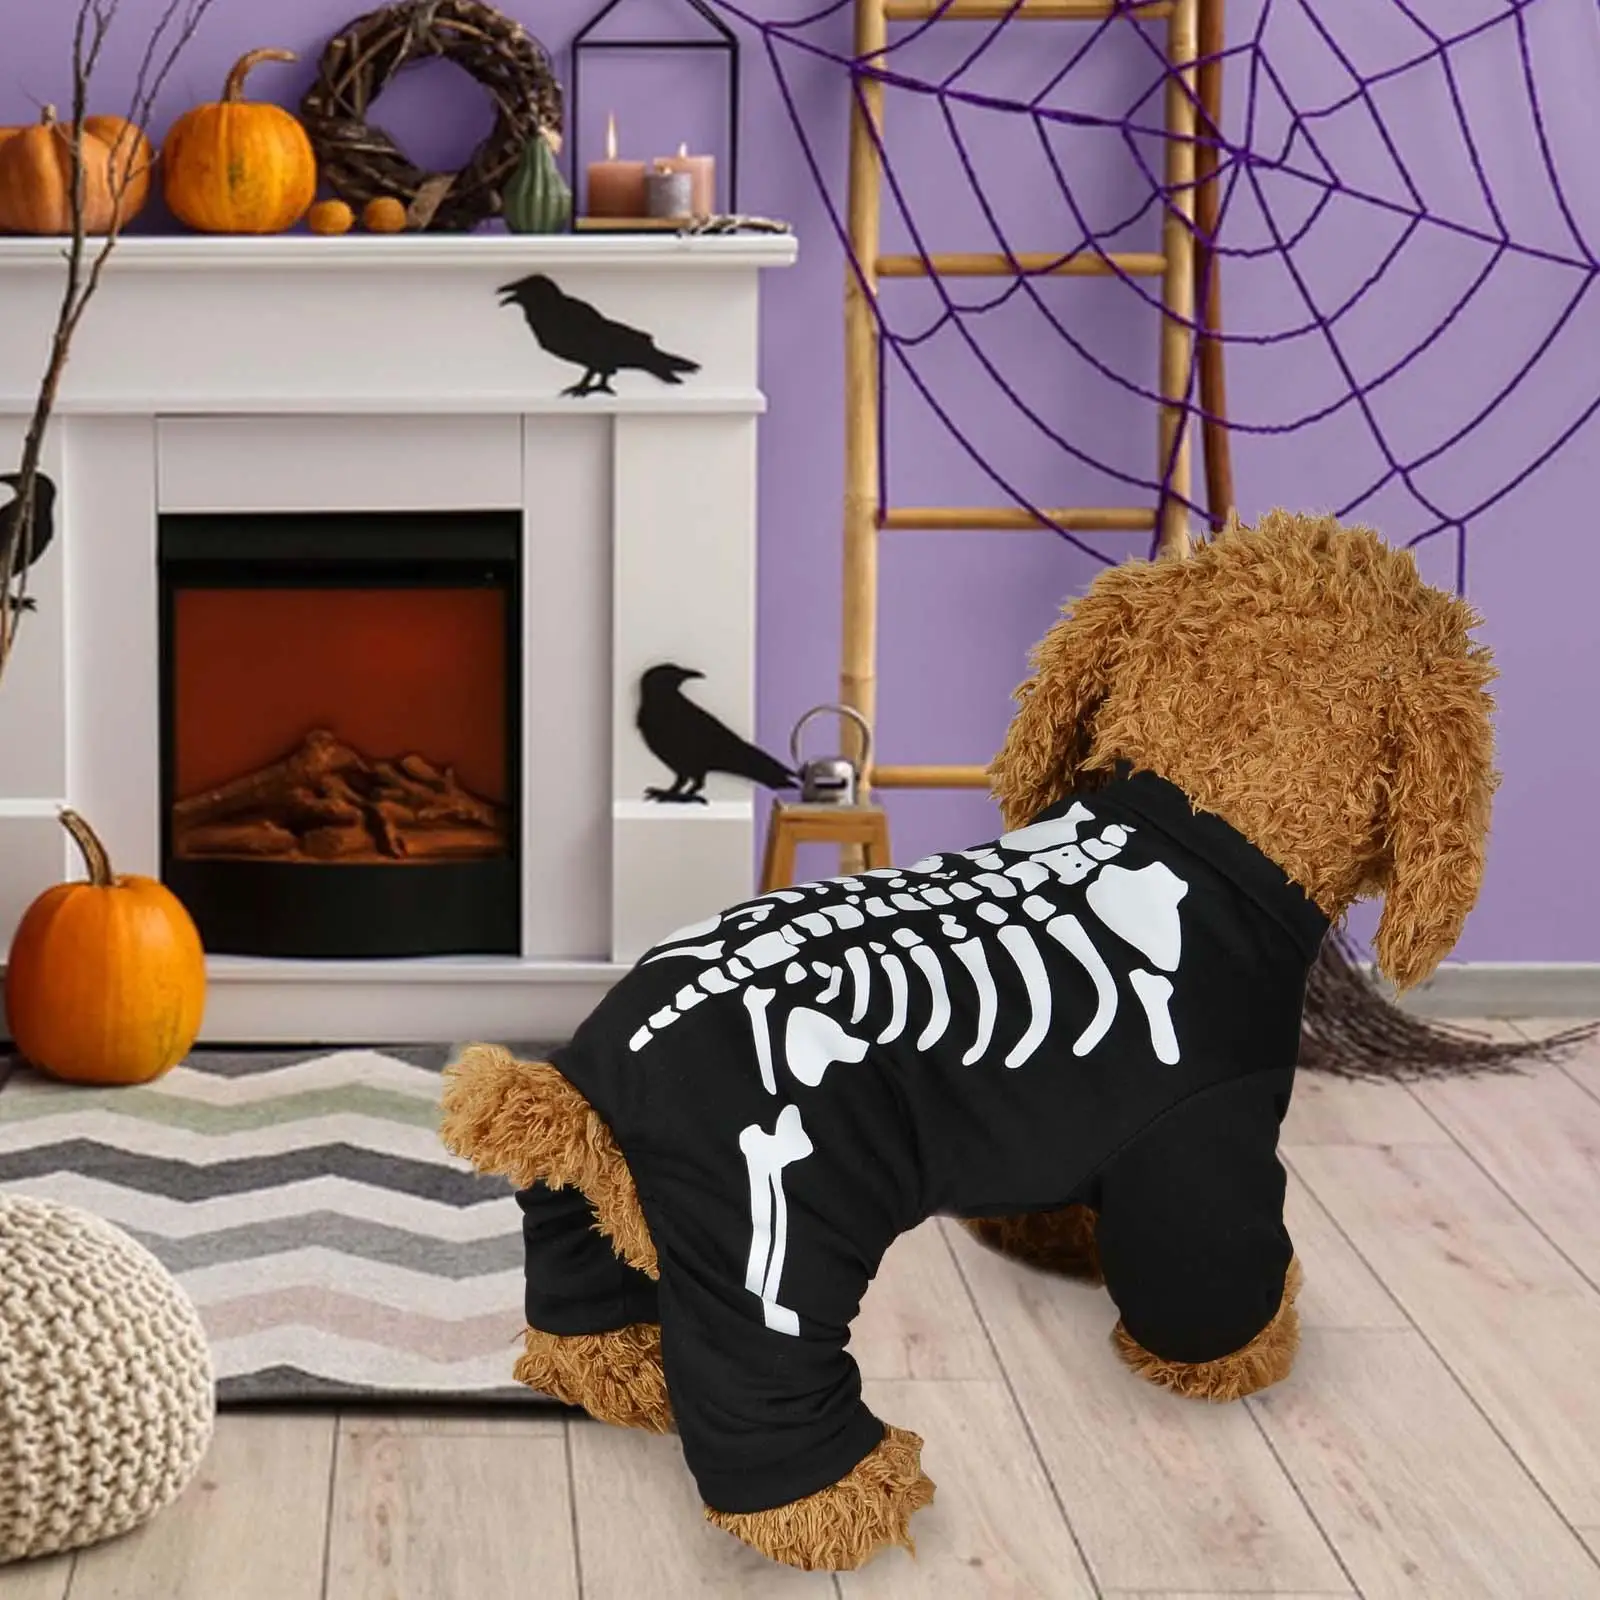 Halloween Skeleton Dog Costume Cosplay Outfit Pet Clothes Fancy Dress Pets Puppy Beauty Contests Photoshoots Props